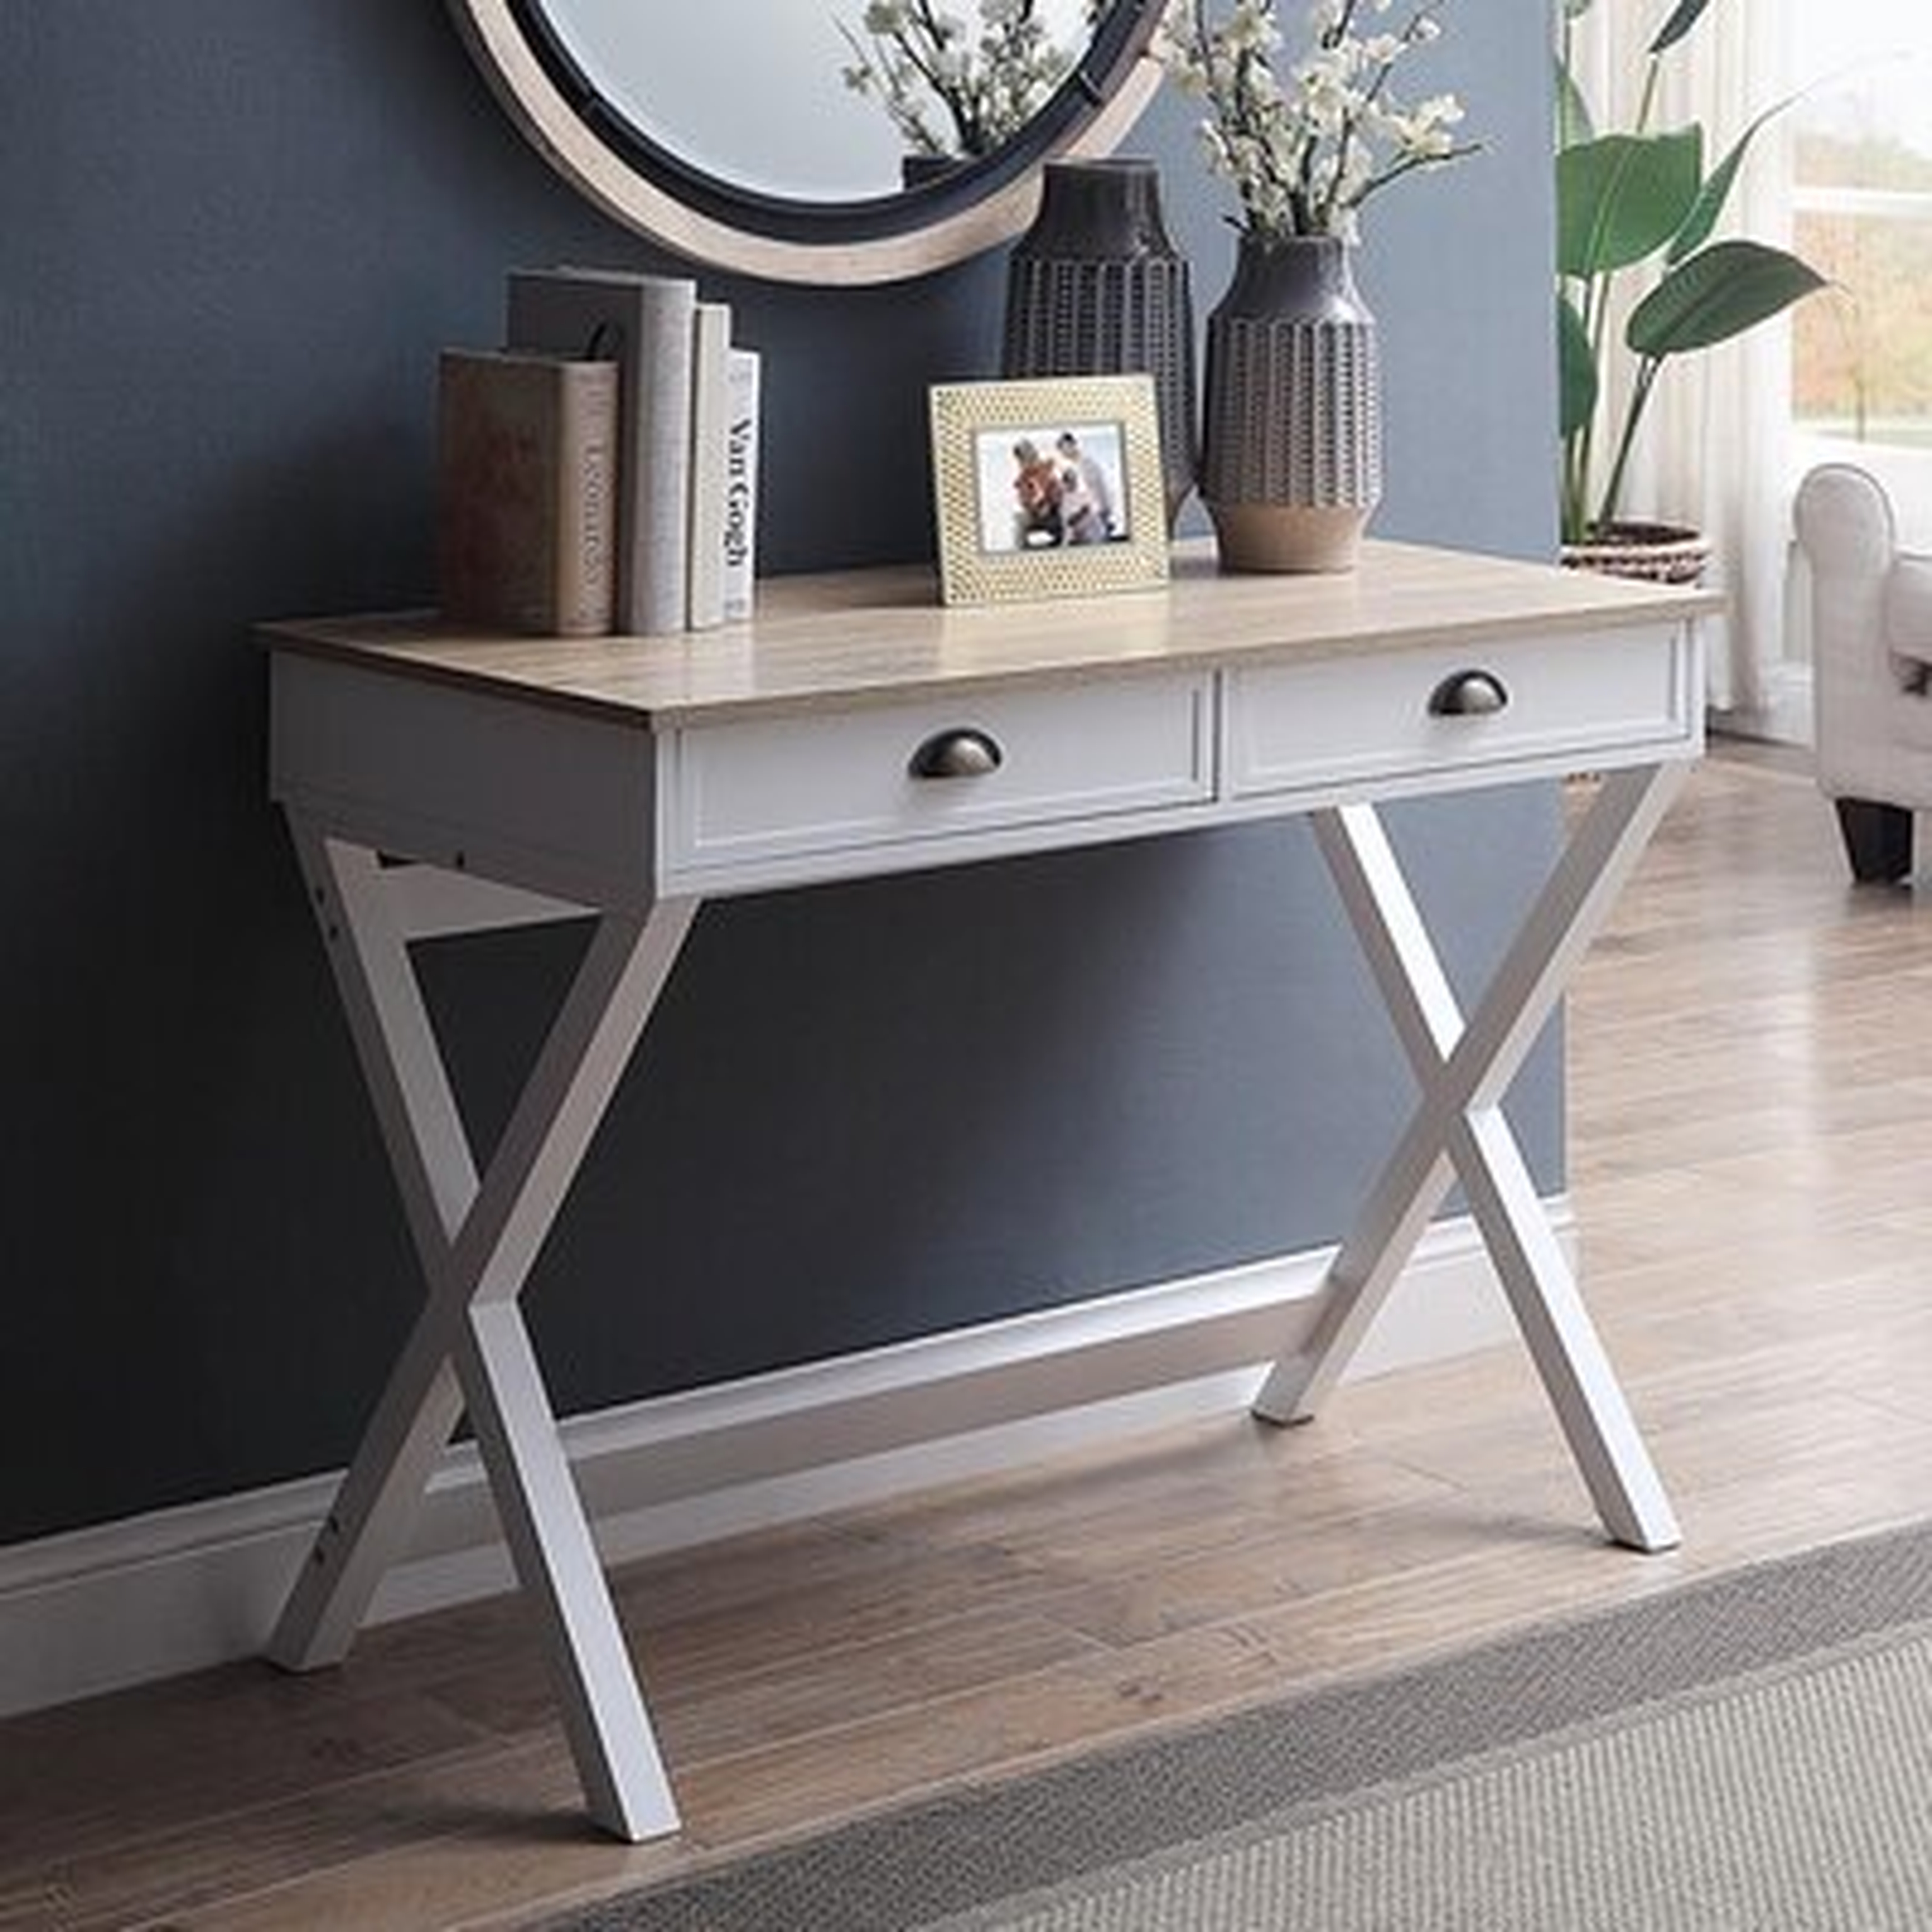 Longshore Tides White Console Table With Drawers, 40" Small Console Tables For Entryway, Pre Assembled White Desk Top - Wayfair